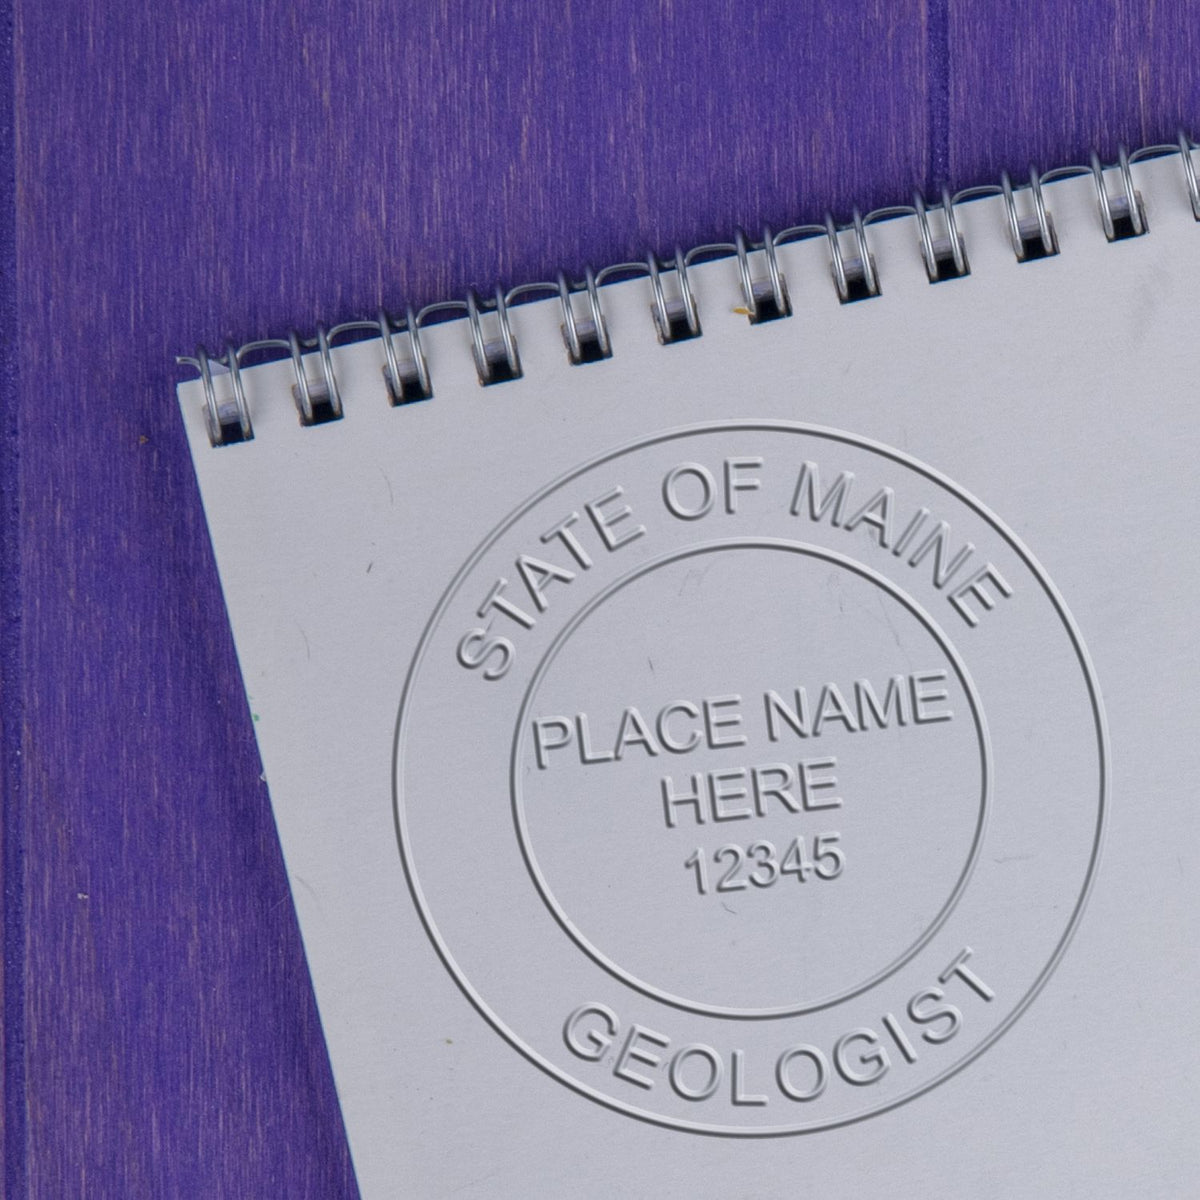 An alternative view of the Soft Maine Professional Geologist Seal stamped on a sheet of paper showing the image in use